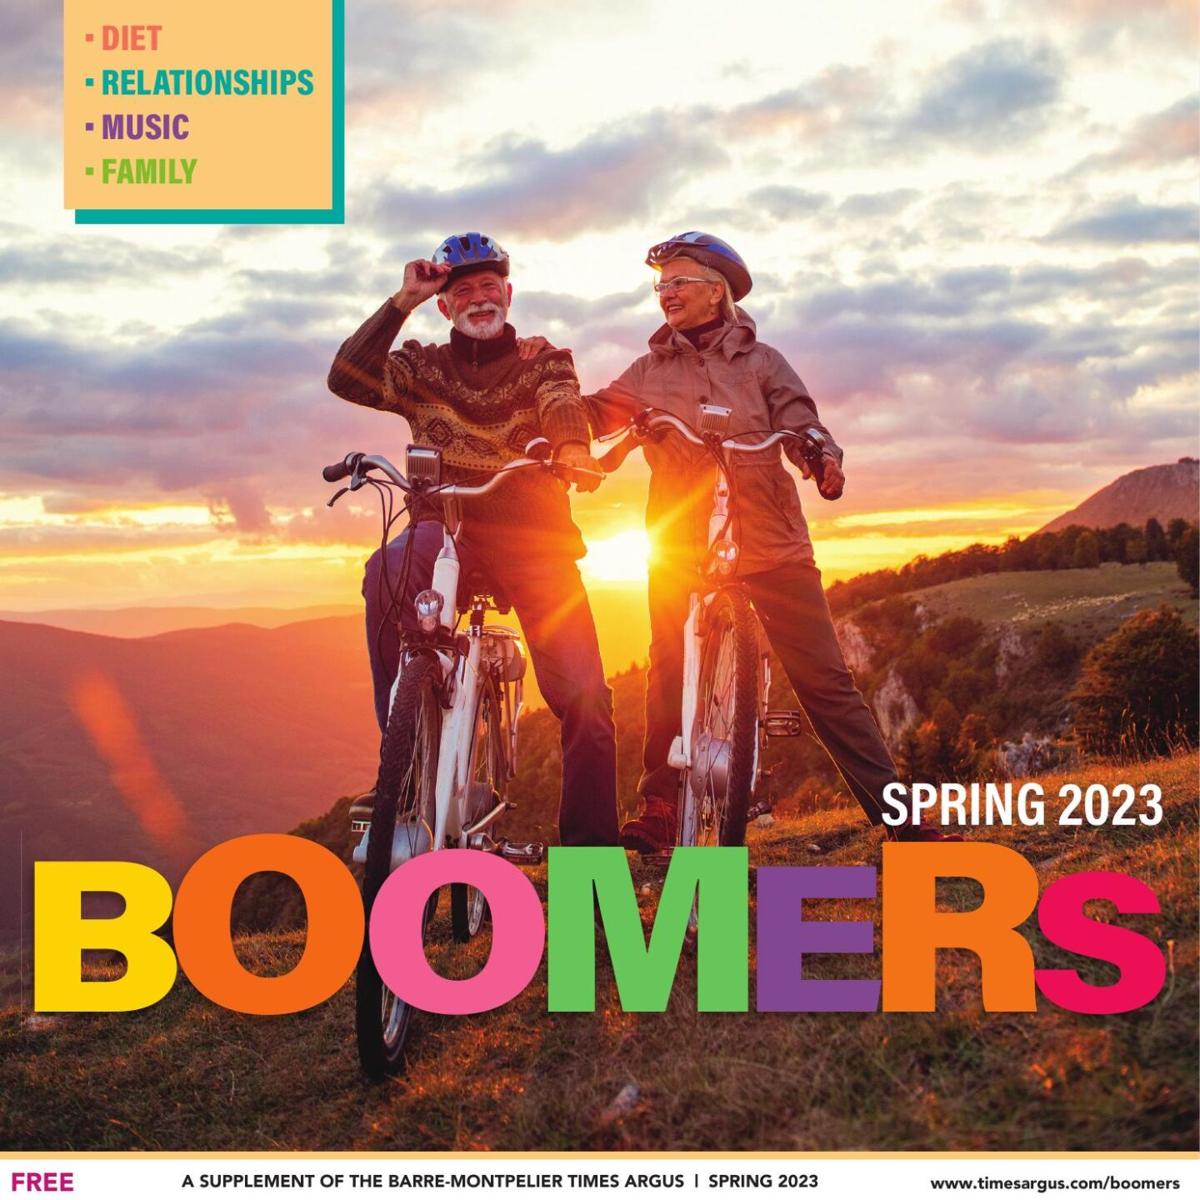 Boomers | Spring 2023